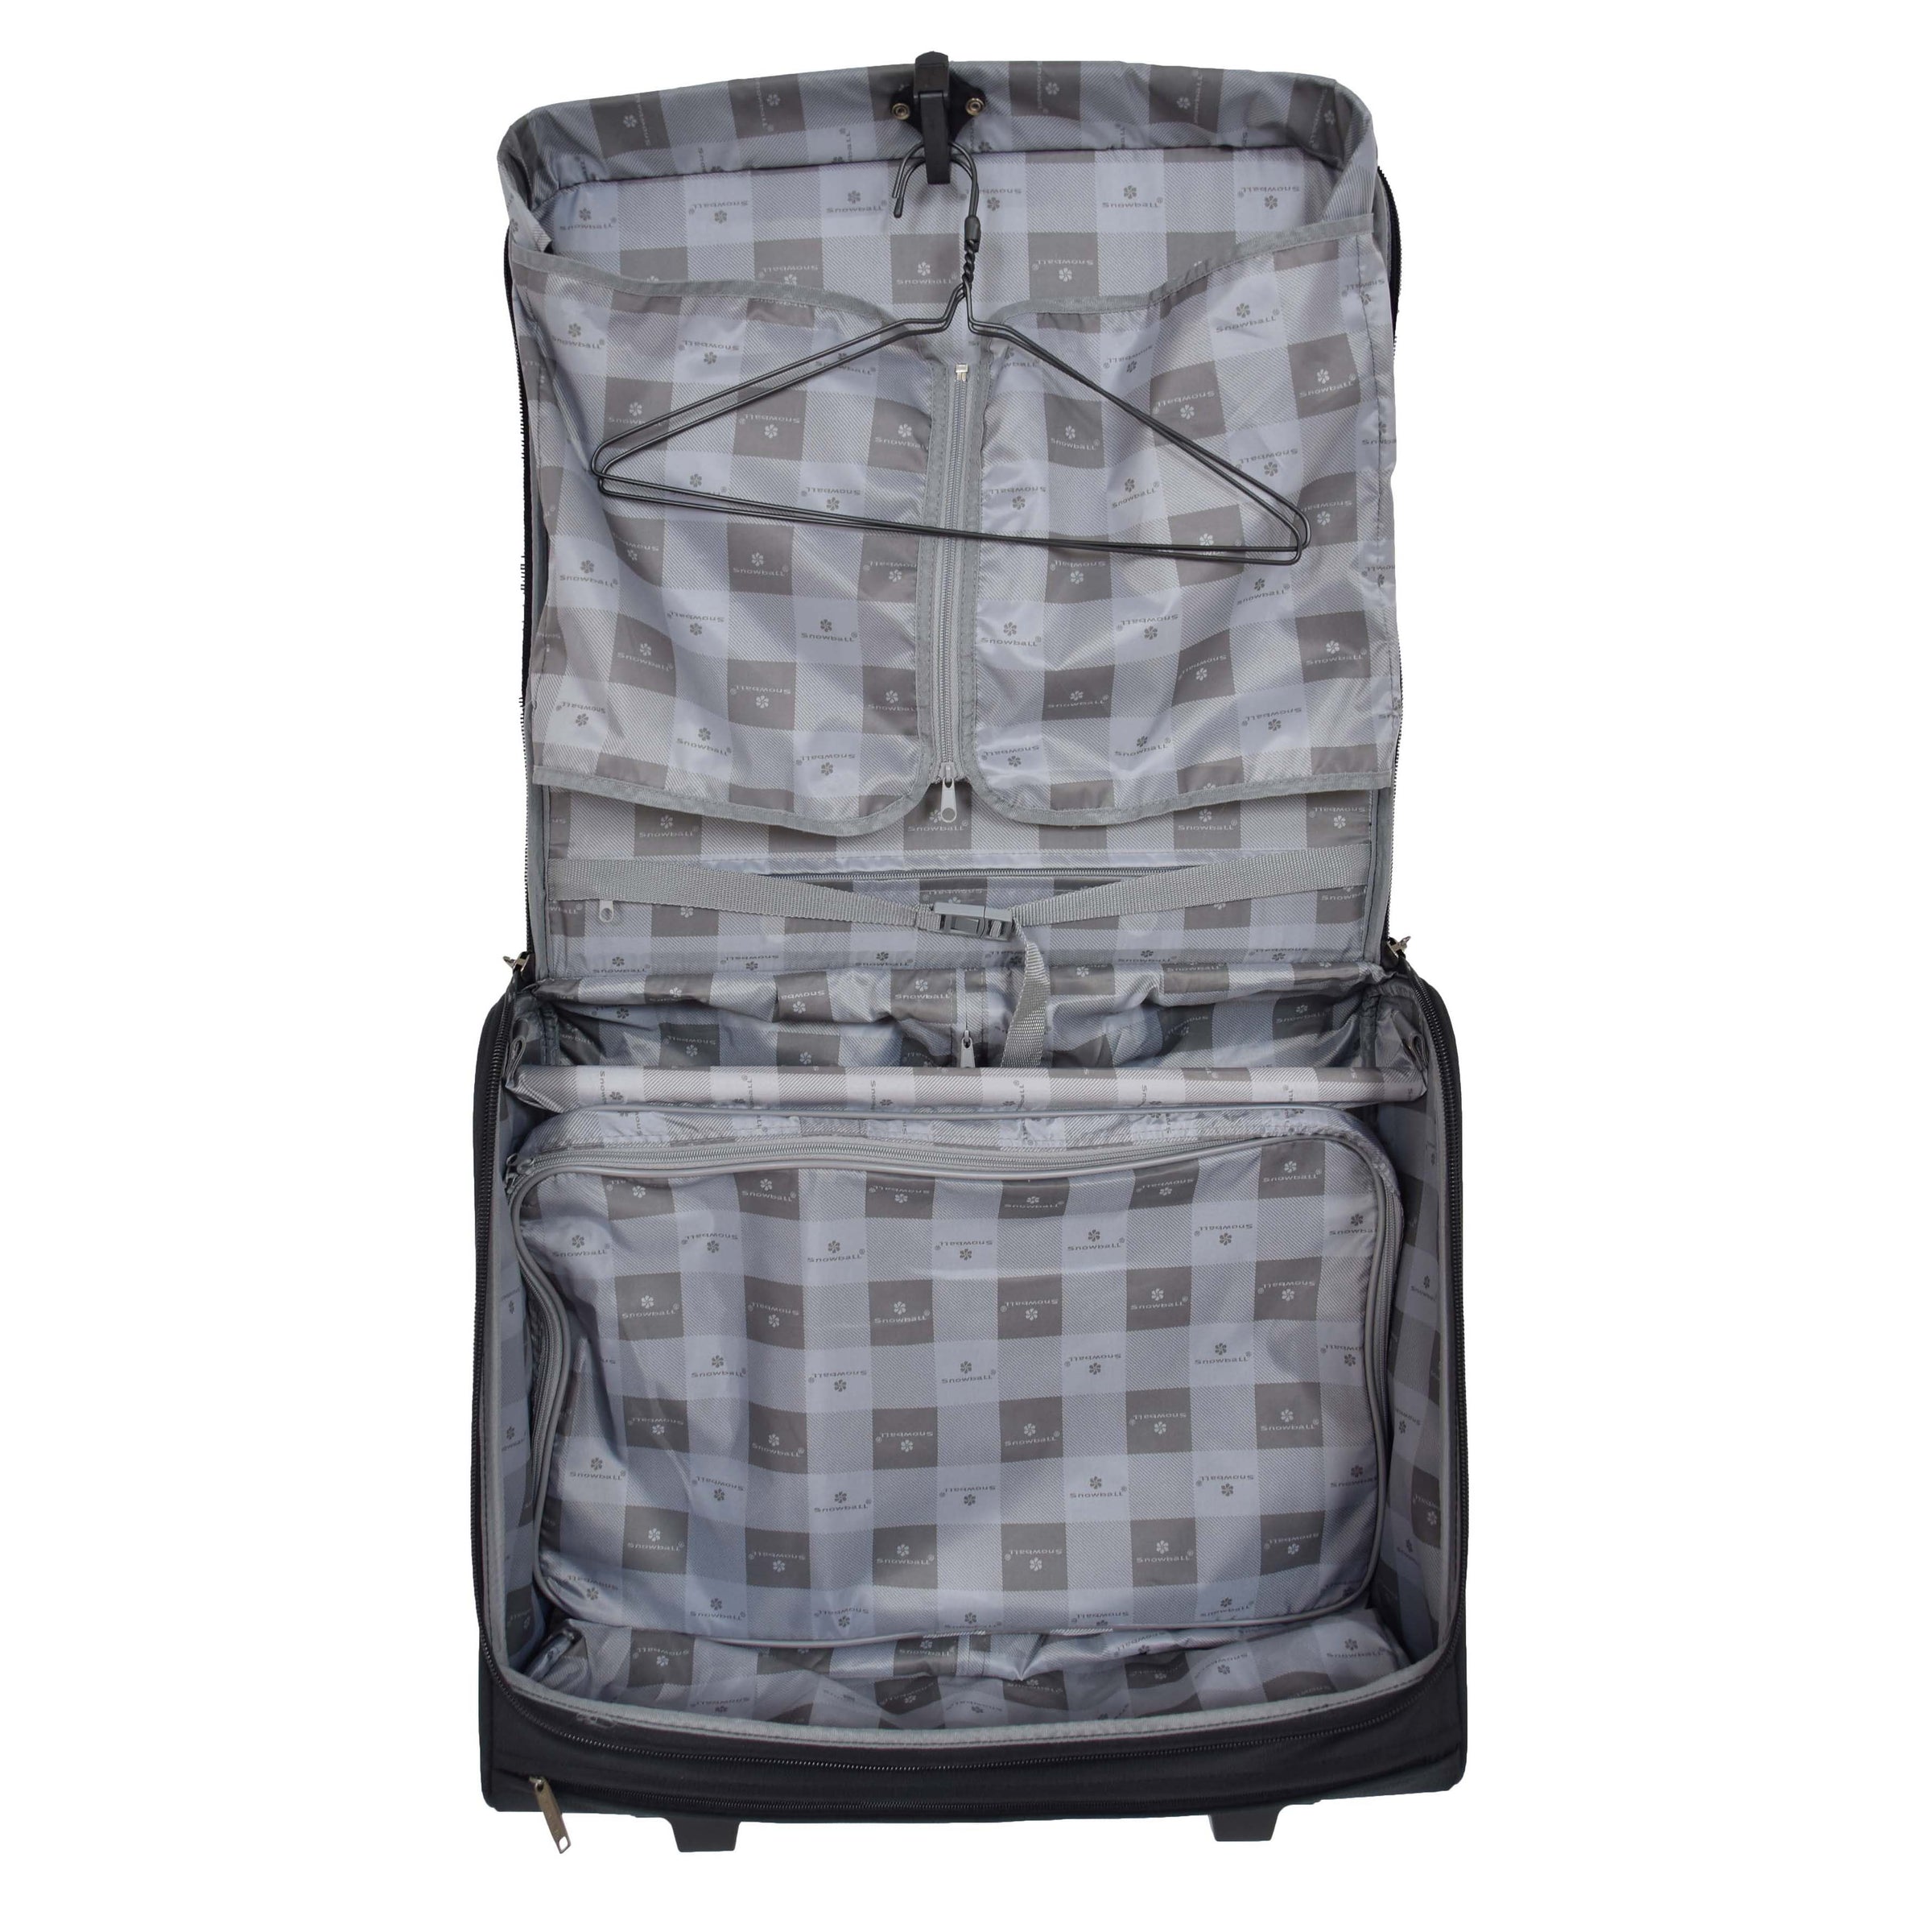 Large Capacity Travel Suit Carrier Black | House of Leather